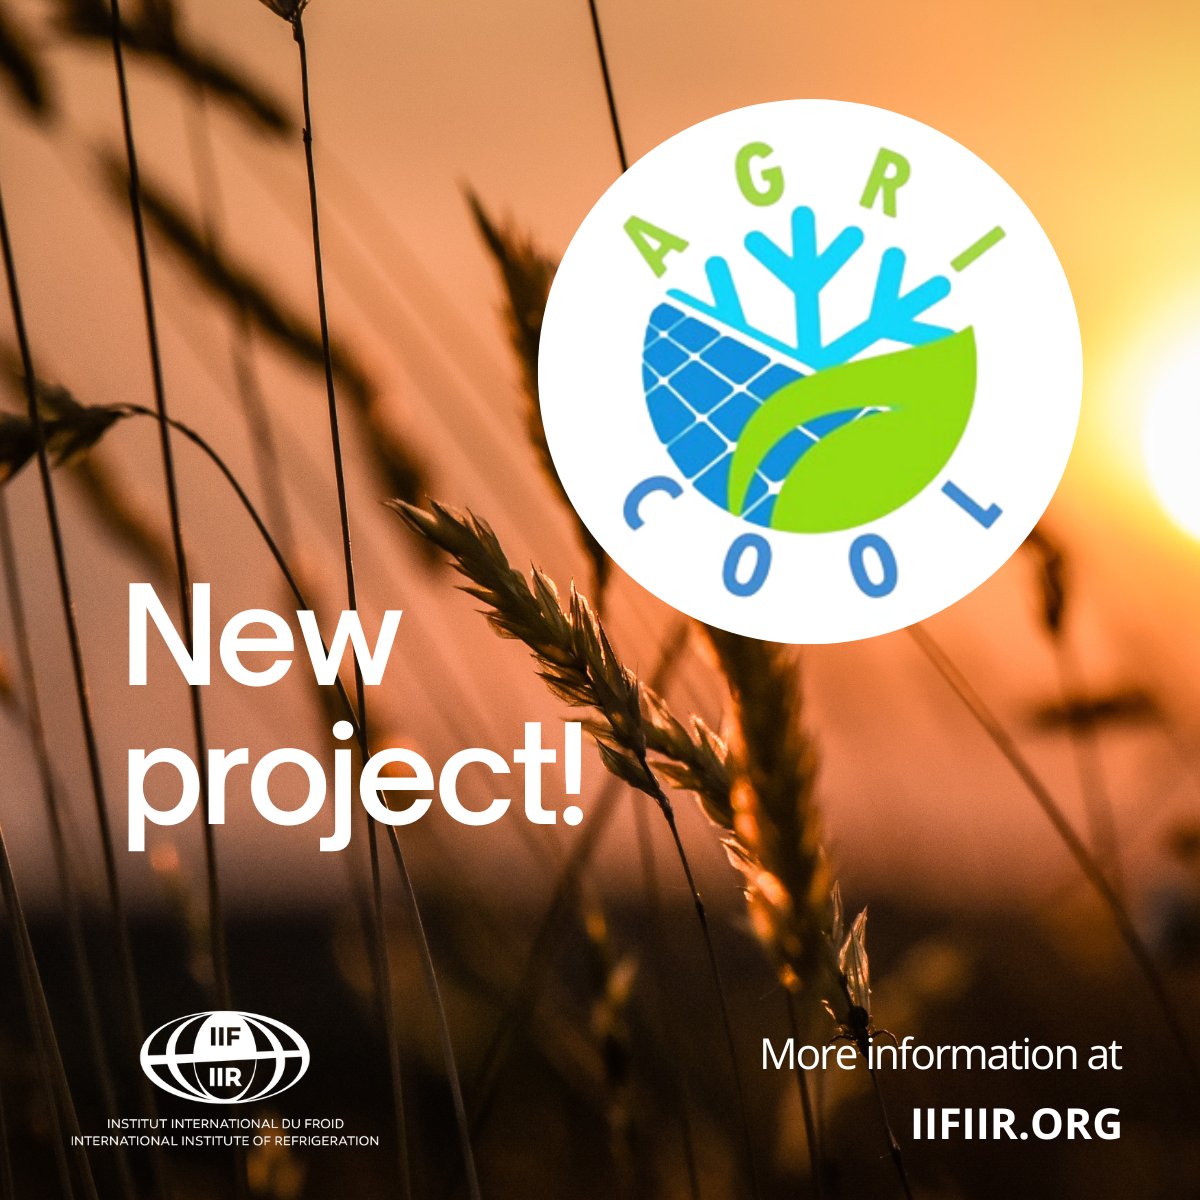 The IIR joins the AGRI-COOL project! Advancing sustainable AGRIculture through off-grid energy and COOLing solutions in africa will revolutionise food storage and cooling methods in regions with limited access to electricity. Learn more here 🔗bit.ly/4dclDa9 #AGRICOOL